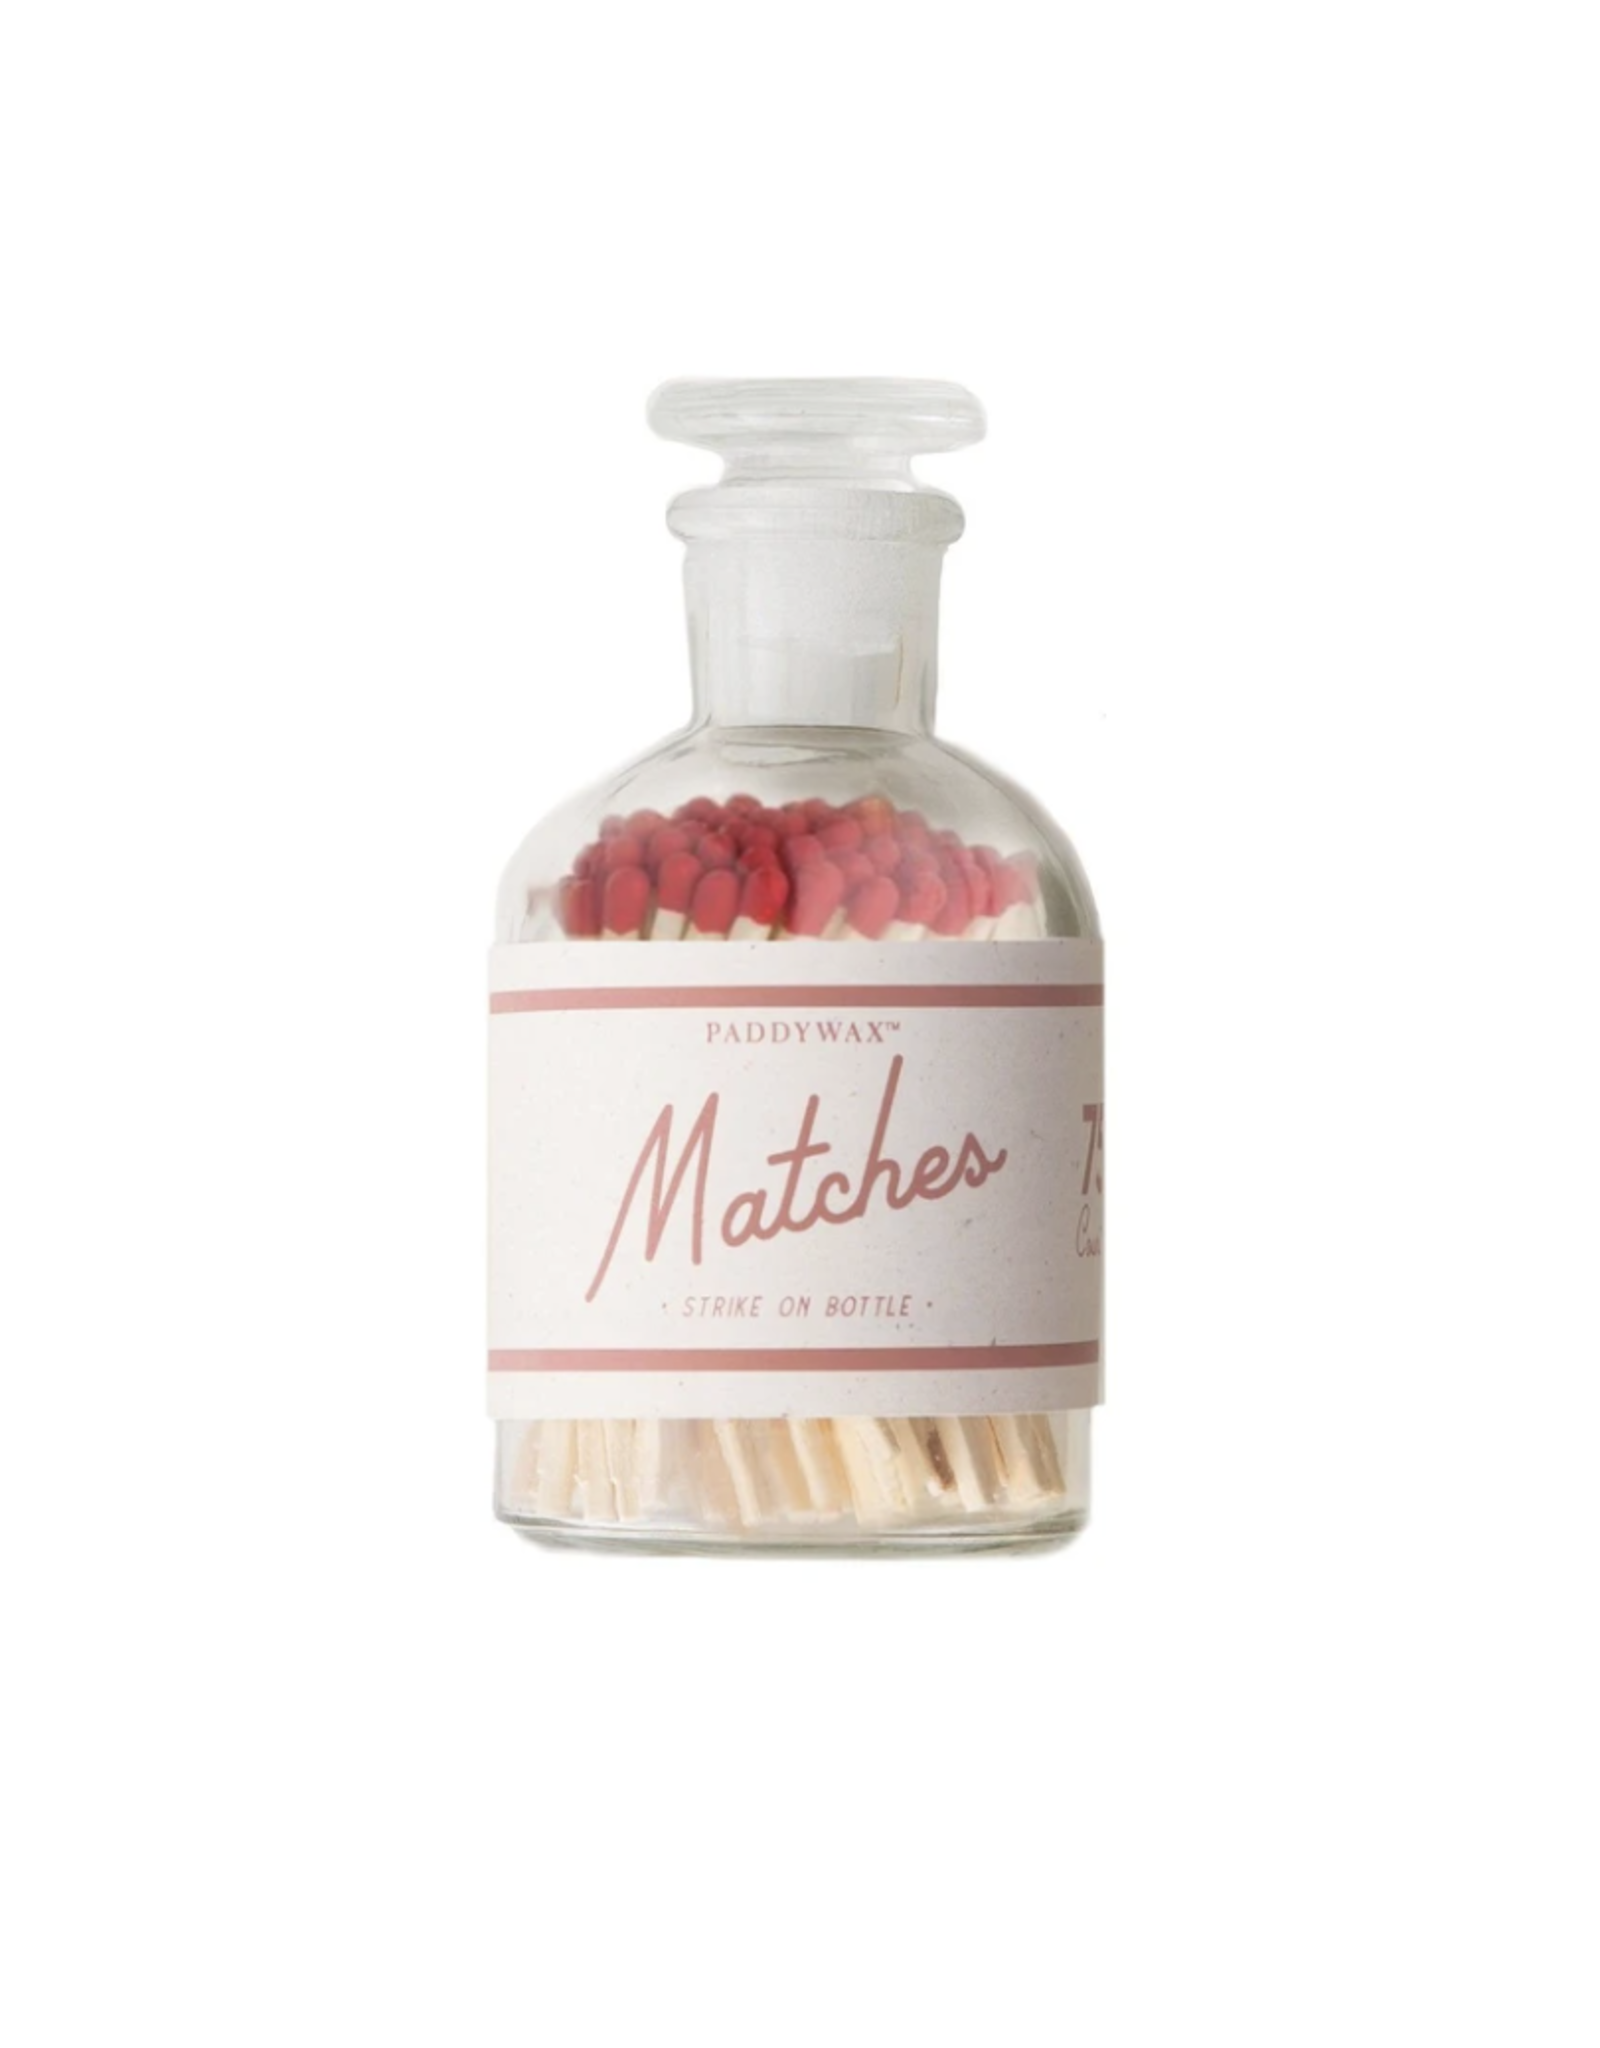 Strike on Bottle Matches - Red